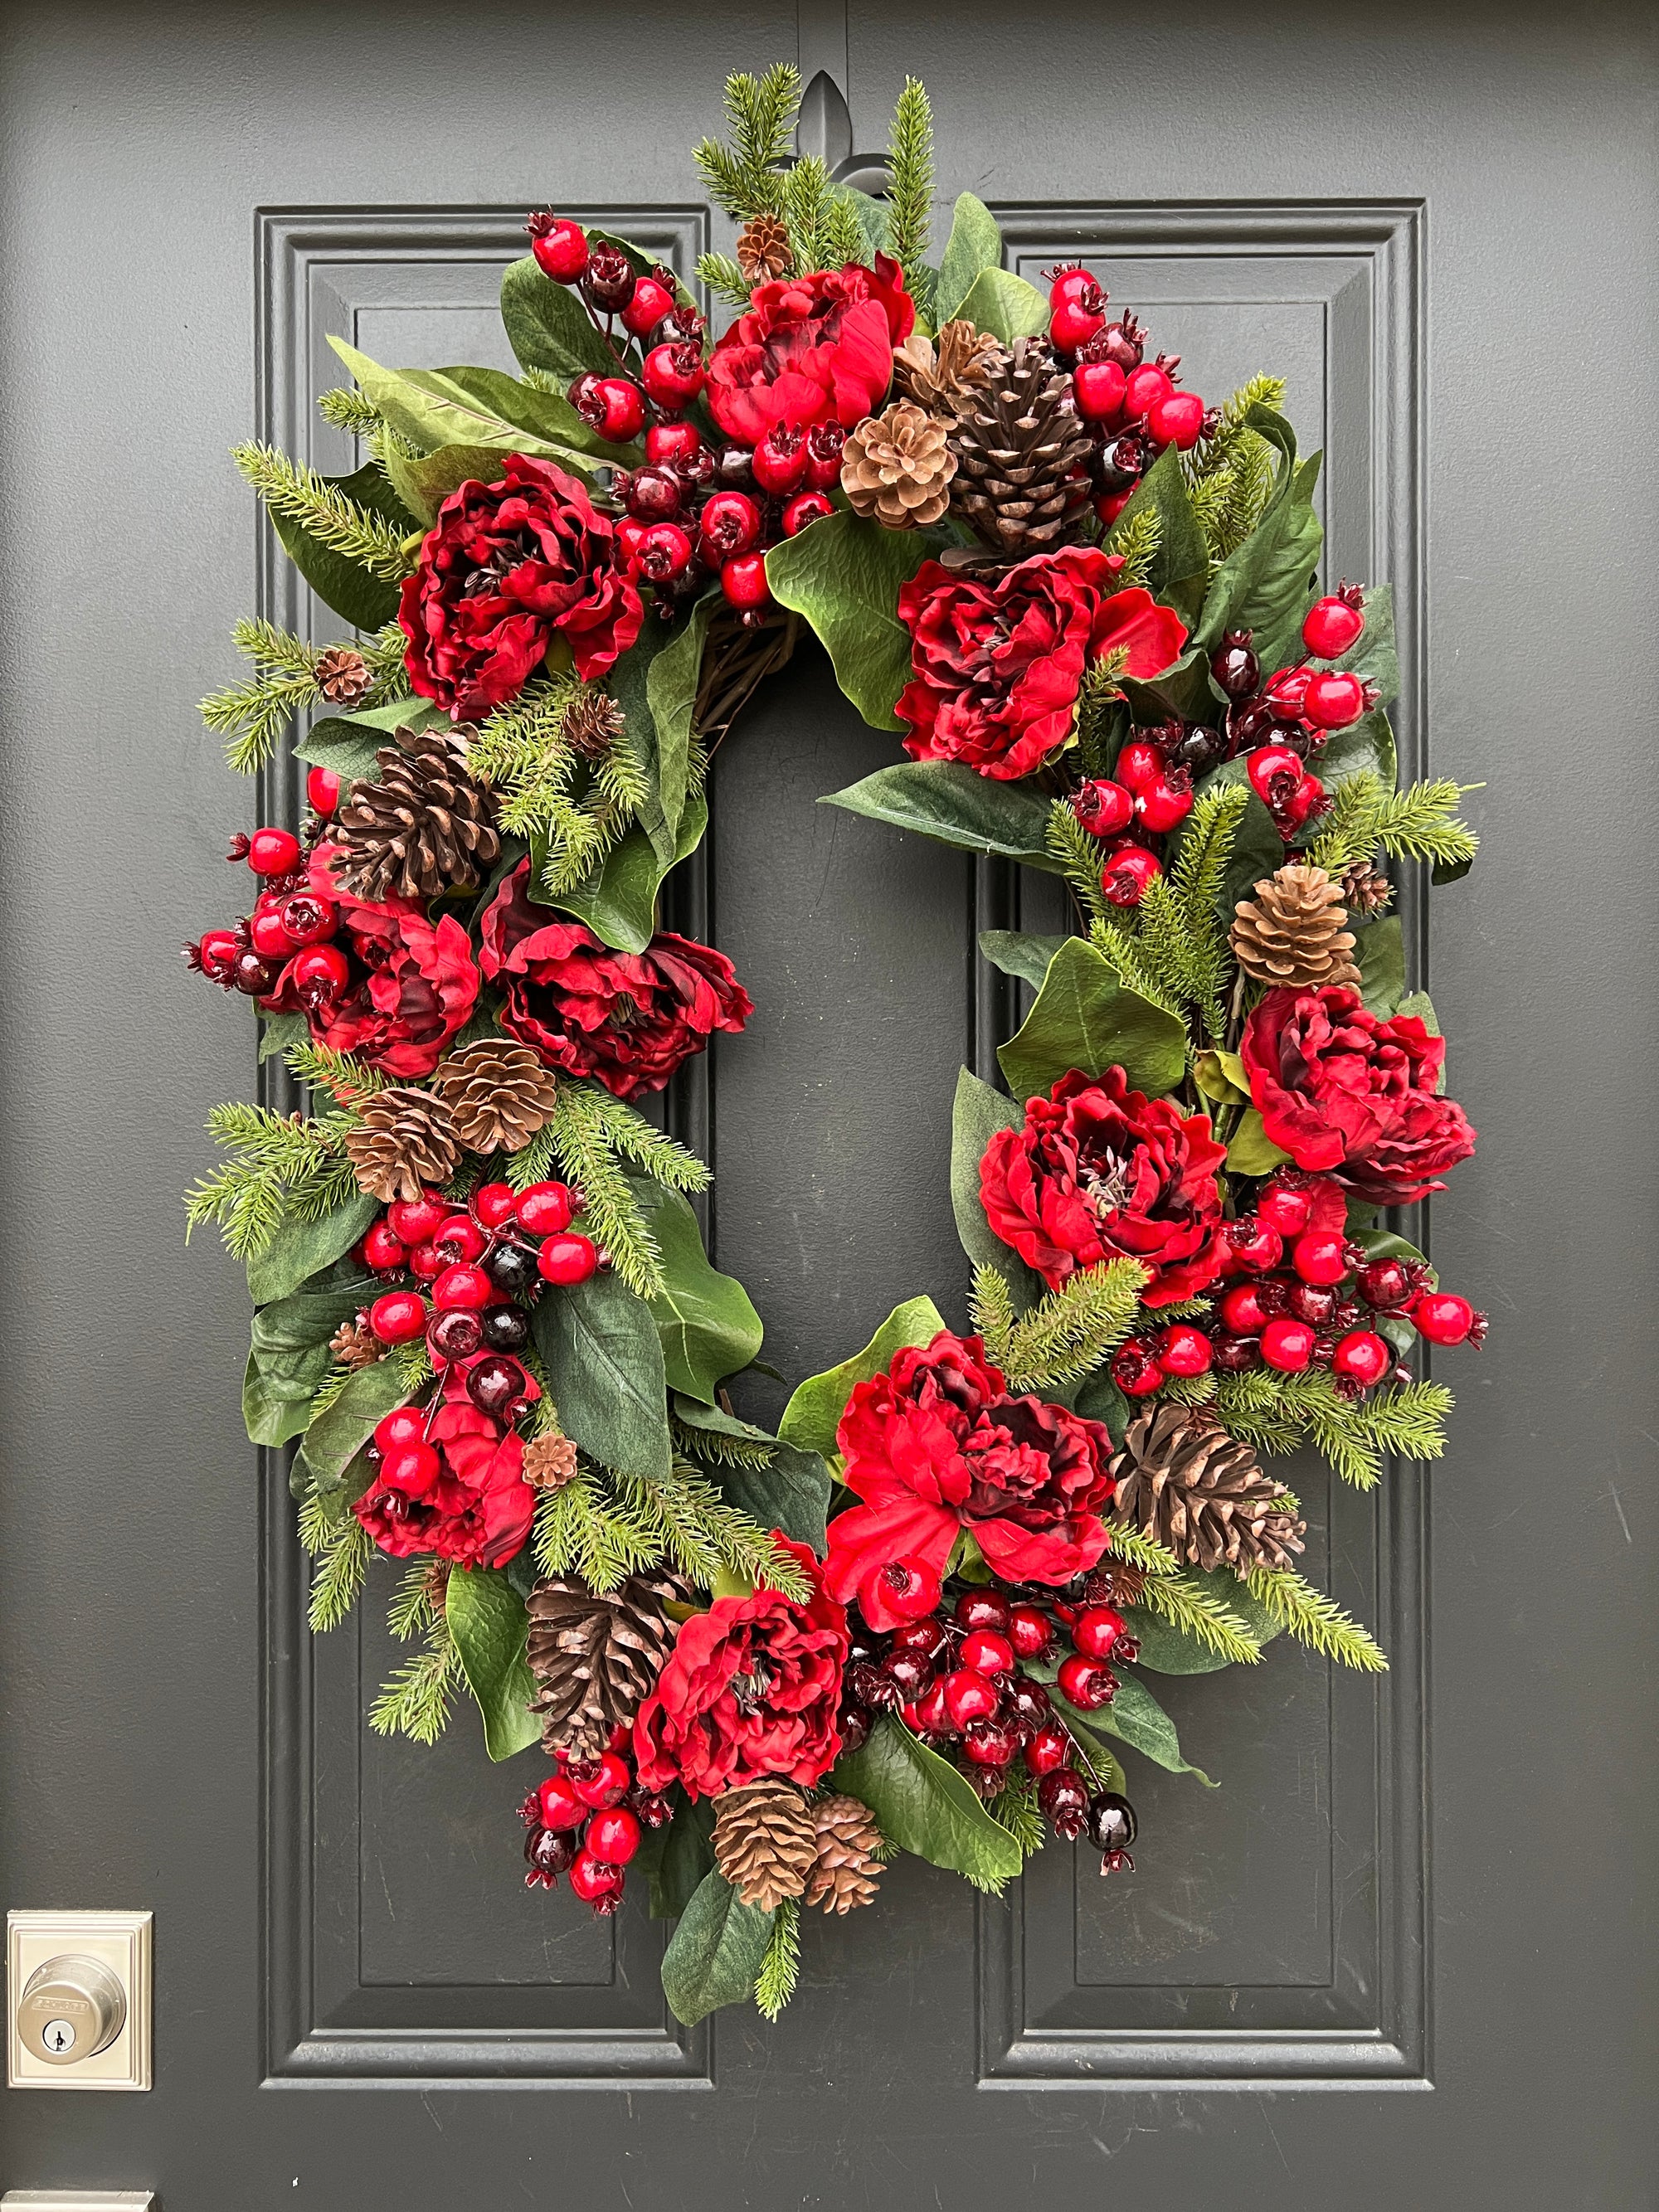 Oval Christmas Wreath with Peonies, Red Berries, Magnolia, Pine and Pinecones, The Spirit of Christmas Wreath